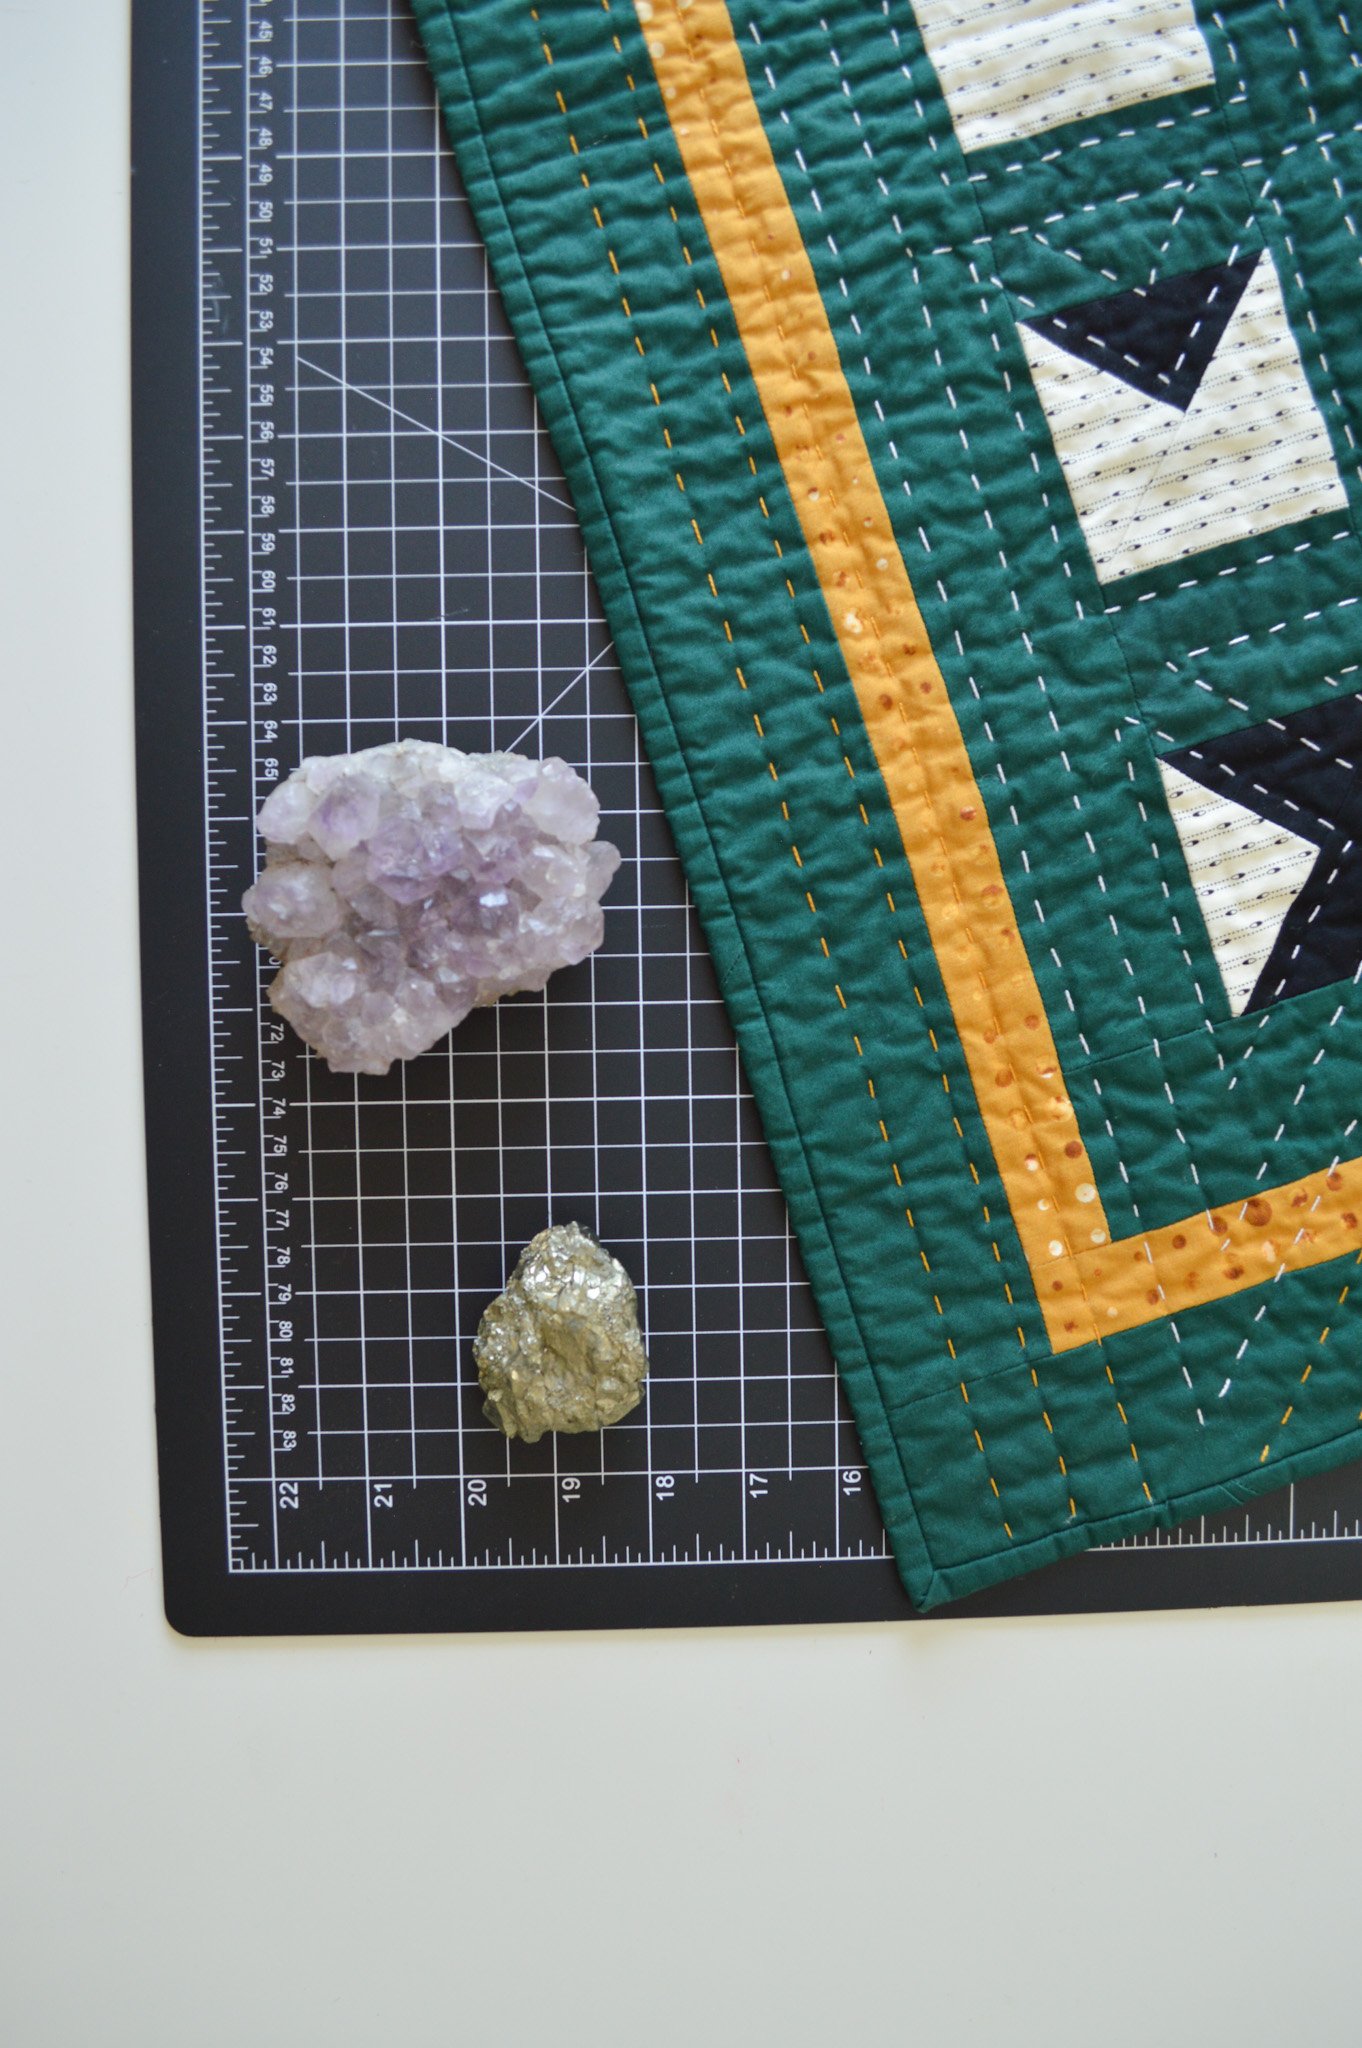  close up of a green mini quilt on a black cutting mat next to amethyst and pyrite stones 